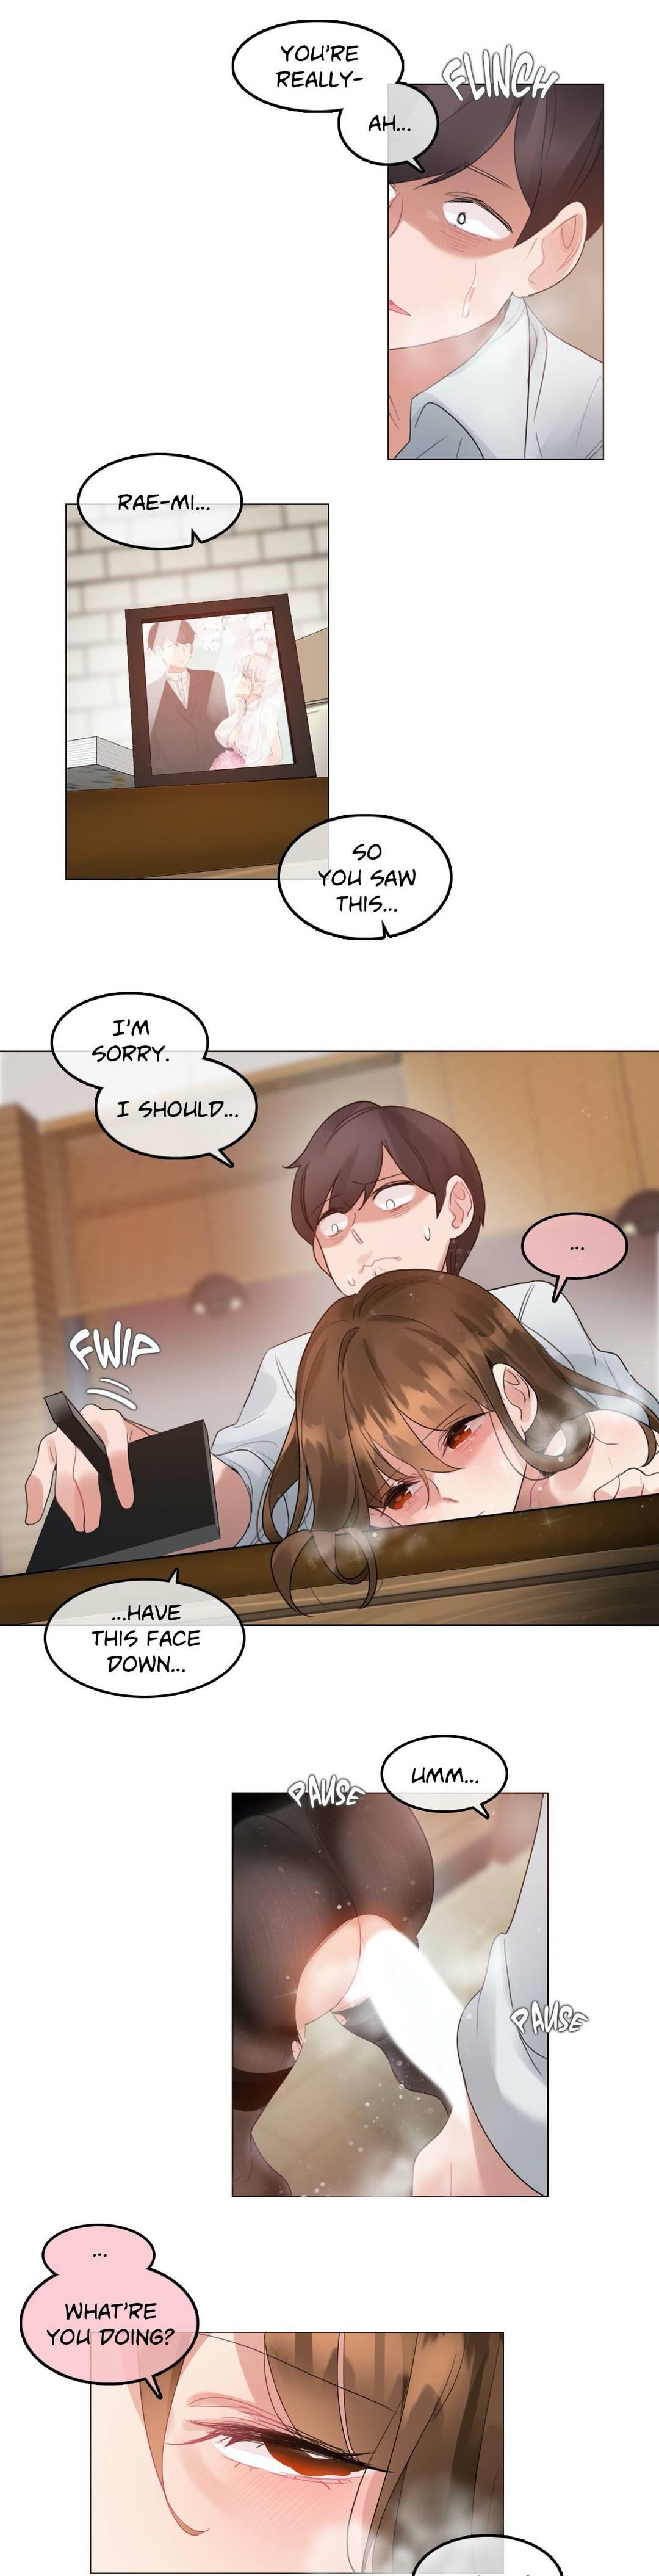 Perverts' Daily Lives Episode 1: Her Secret Recipe Ch1-19 466